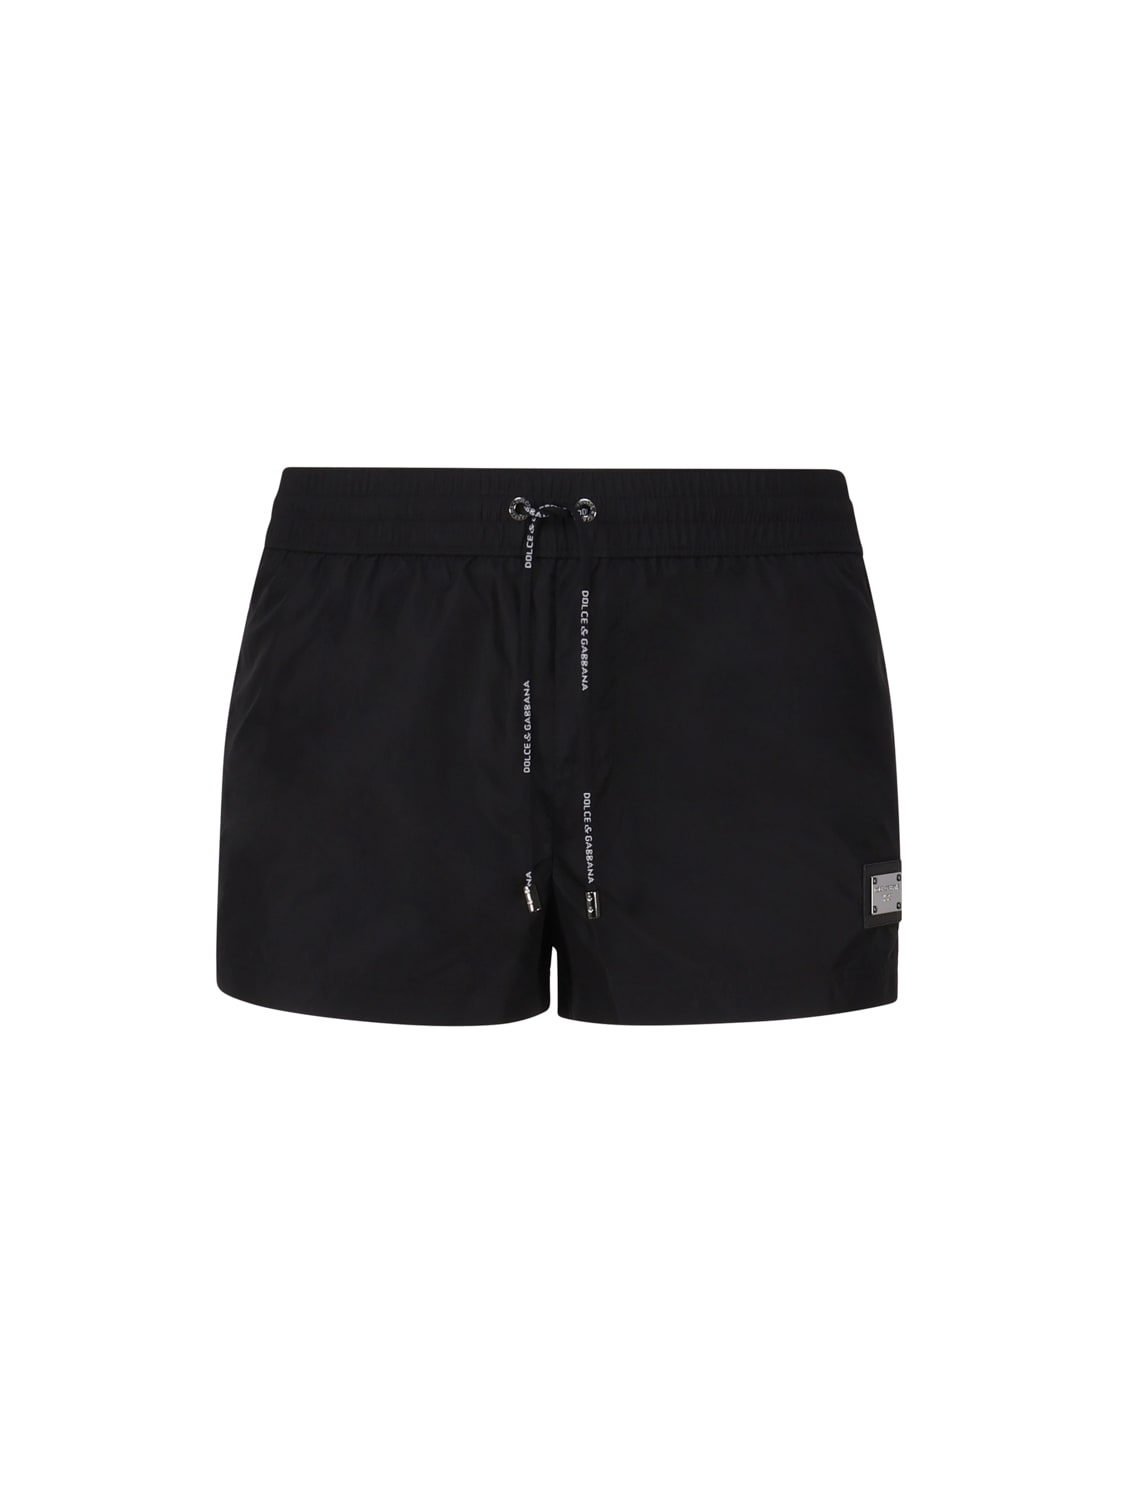 Short Beach Boxer Shorts Made Of Lightweight Nylon With Metal Logo Plaque